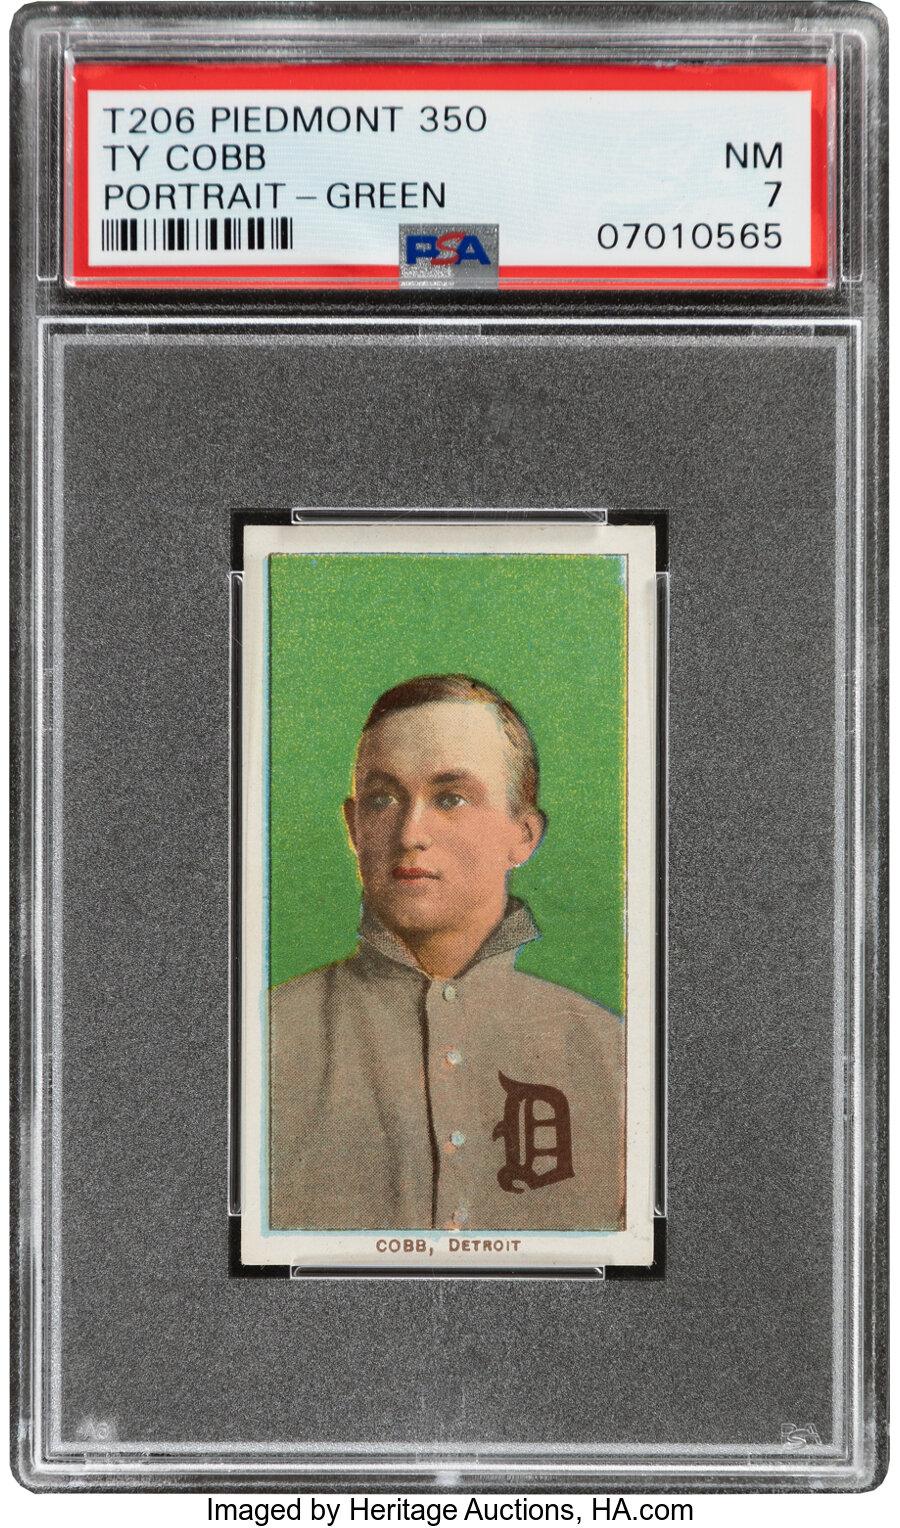 1909-11 T206 Piedmont 350 Ty Cobb (Portrait-Green) PSA NM 7 - Pop One, One Higher With This Brand & Series